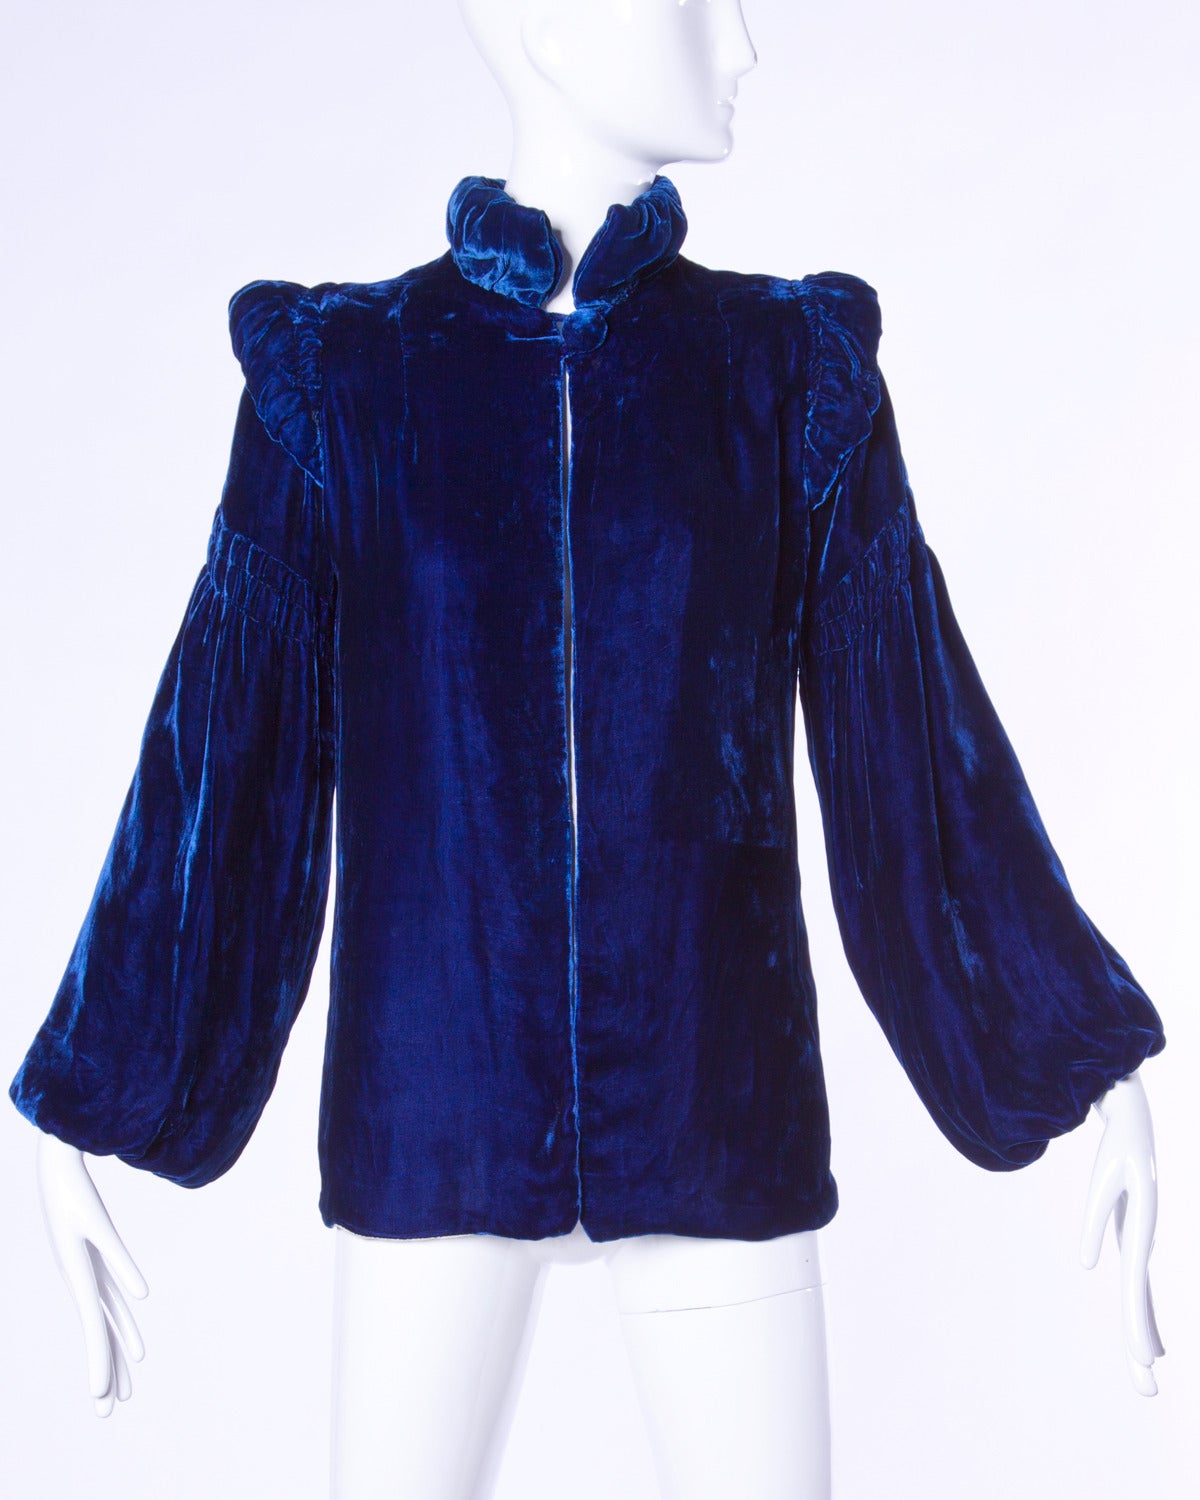 Gorgeous deep blue silk velvet opera jacket with ruched shoulders and balloon sleeves.

Details:

Fully Lined
Front Button Closure
Color: Blue
Fabric: Velvet

Measurements:

Bust: Up To 40